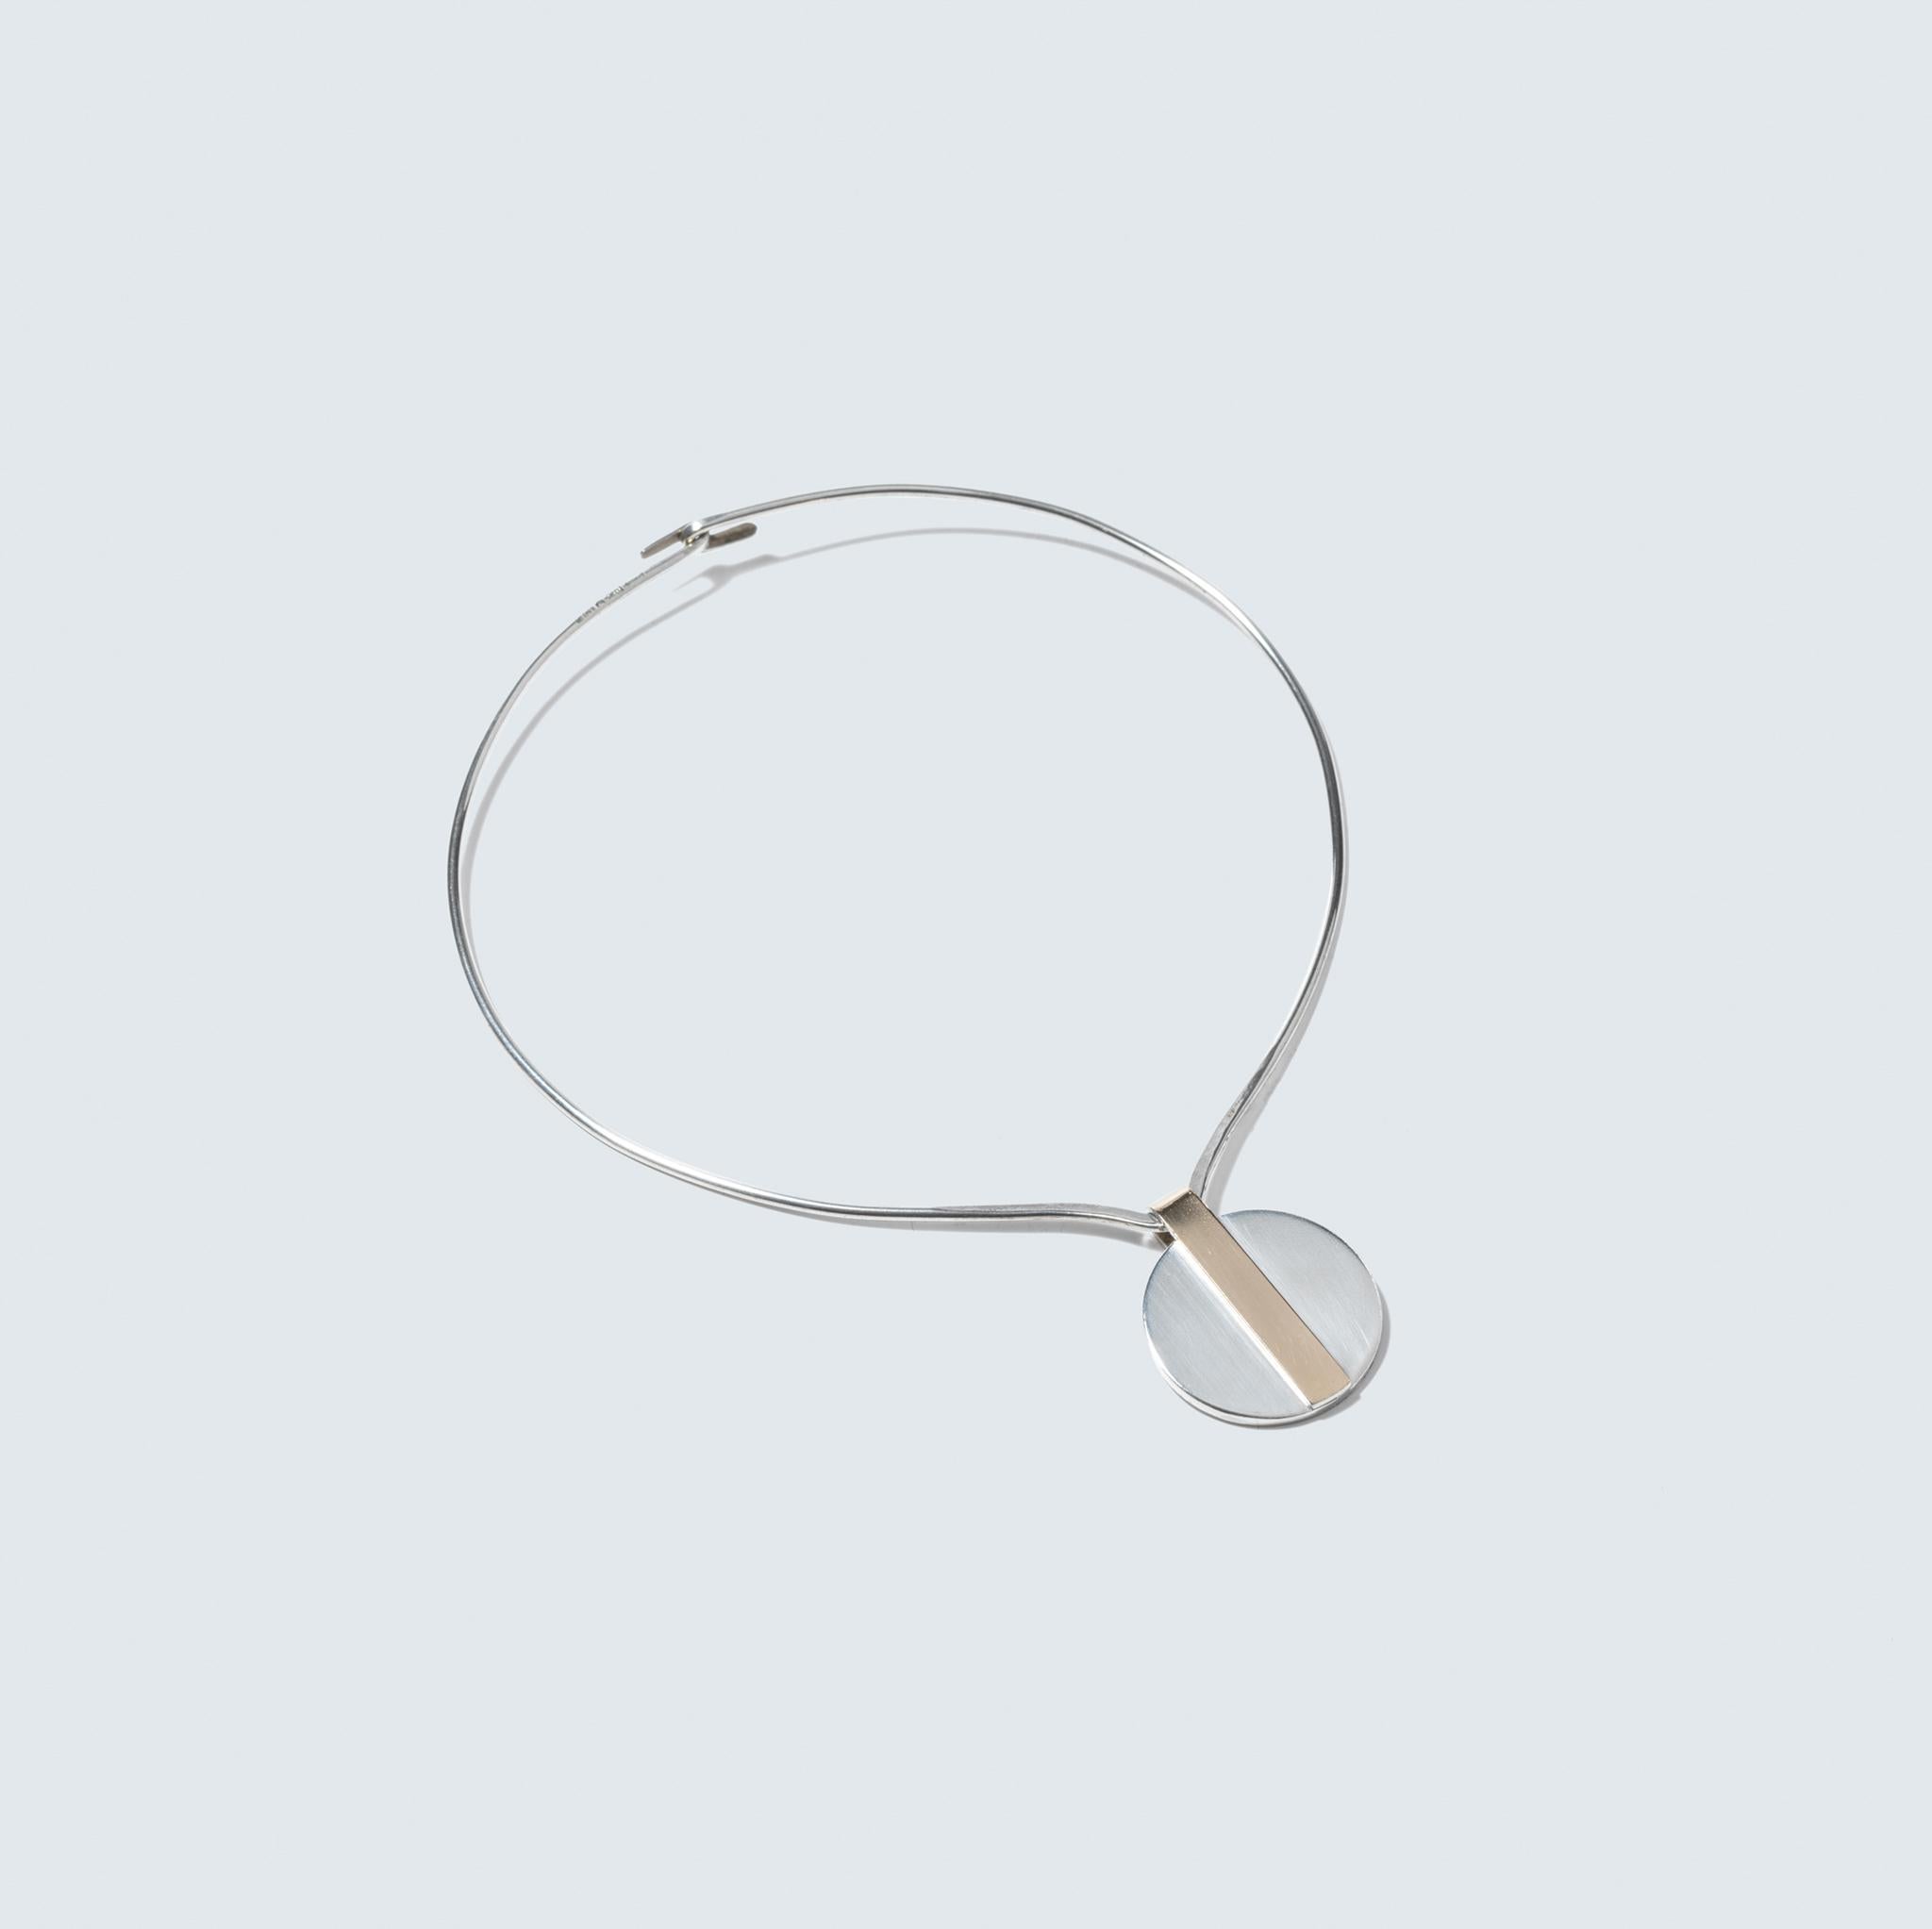 This is a sleek and modern sterling silver neck ring that has a minimalist design. It features a circular silver pendant, which is elegantly simple, with a striking gilded silver strip crossing through its center, adding an authentic touch of